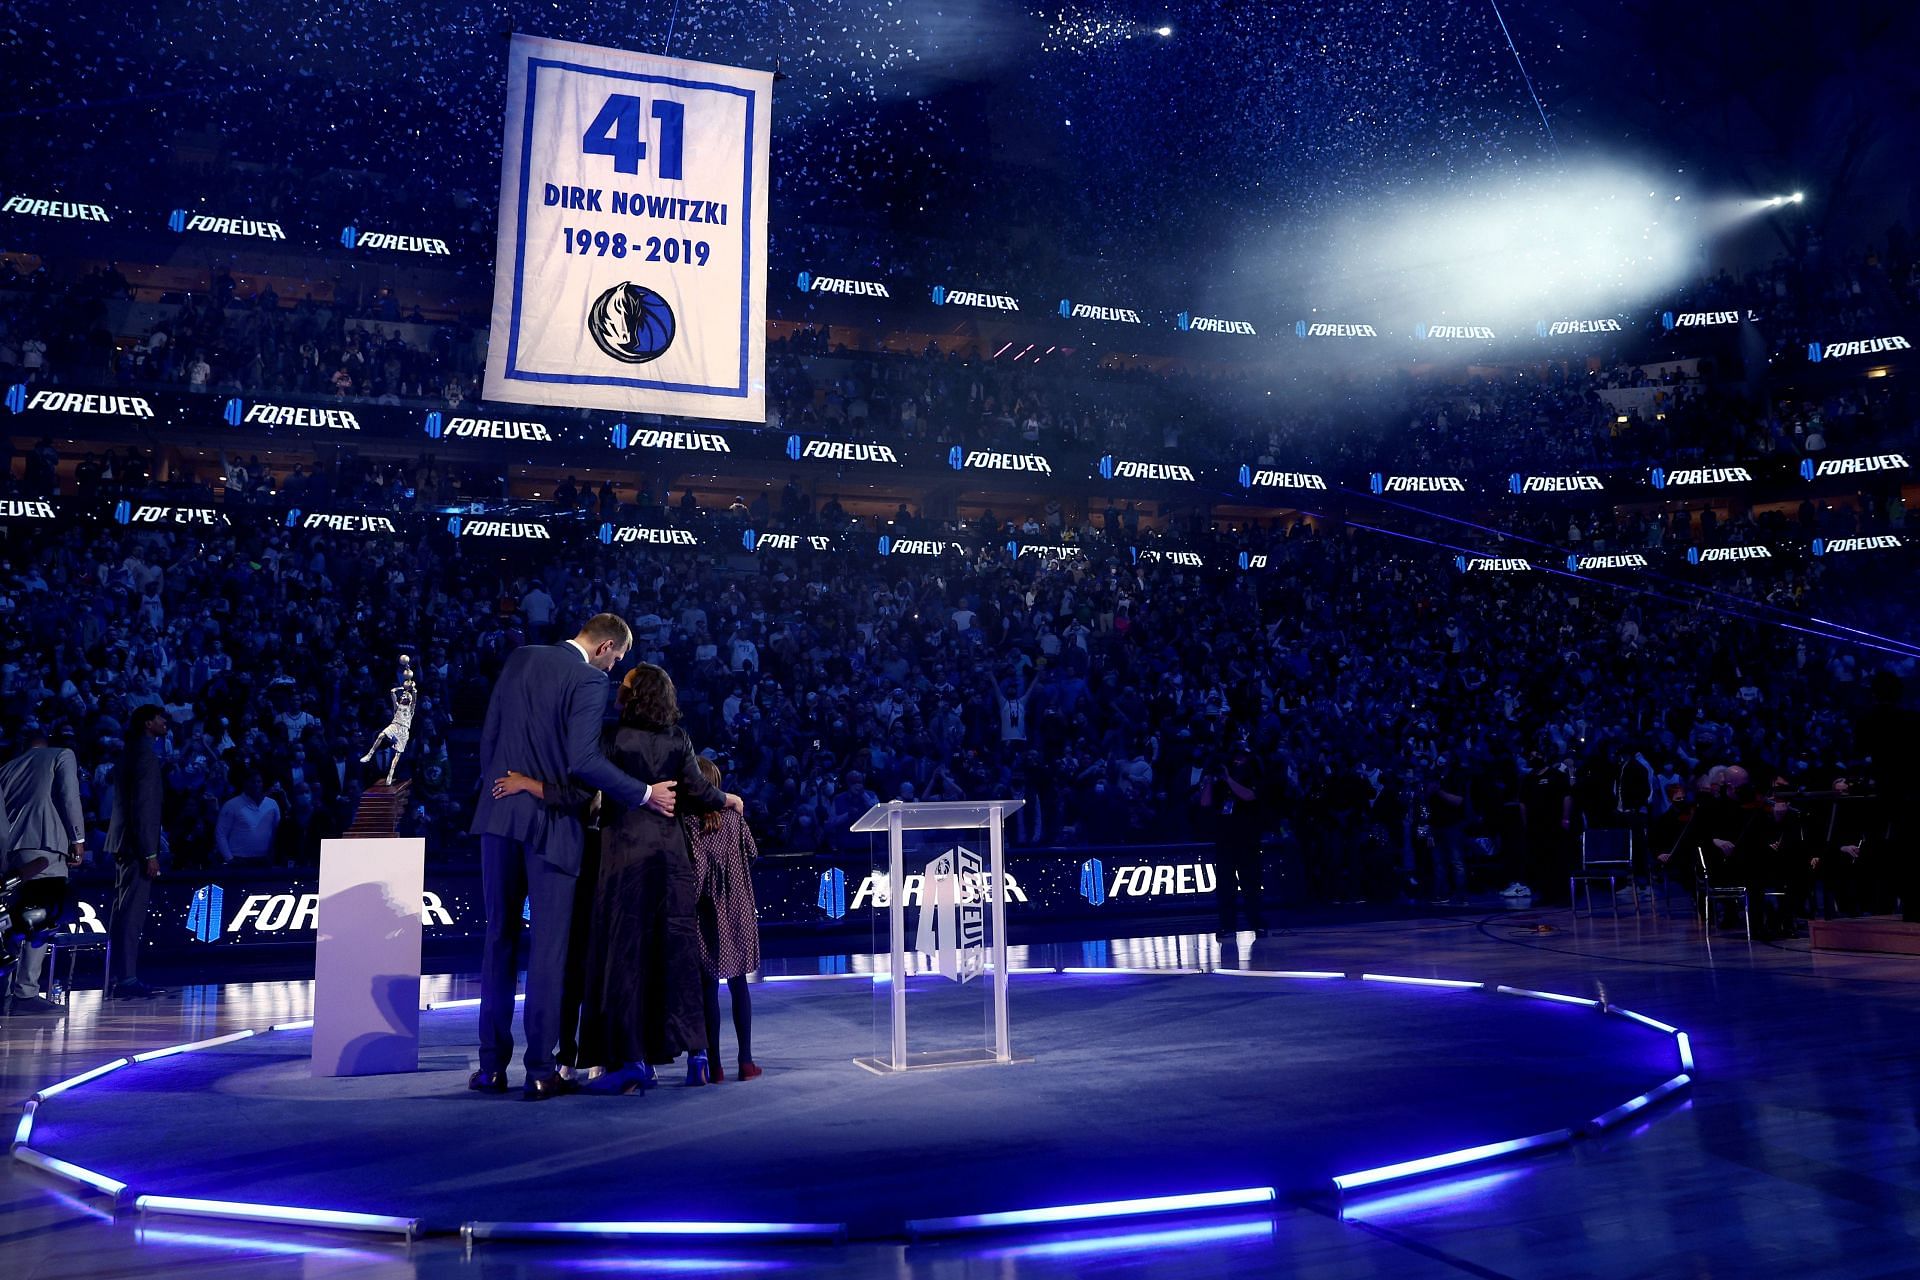 Dirk Nowitzki sees his jersey retired by the Dallas Mavericks